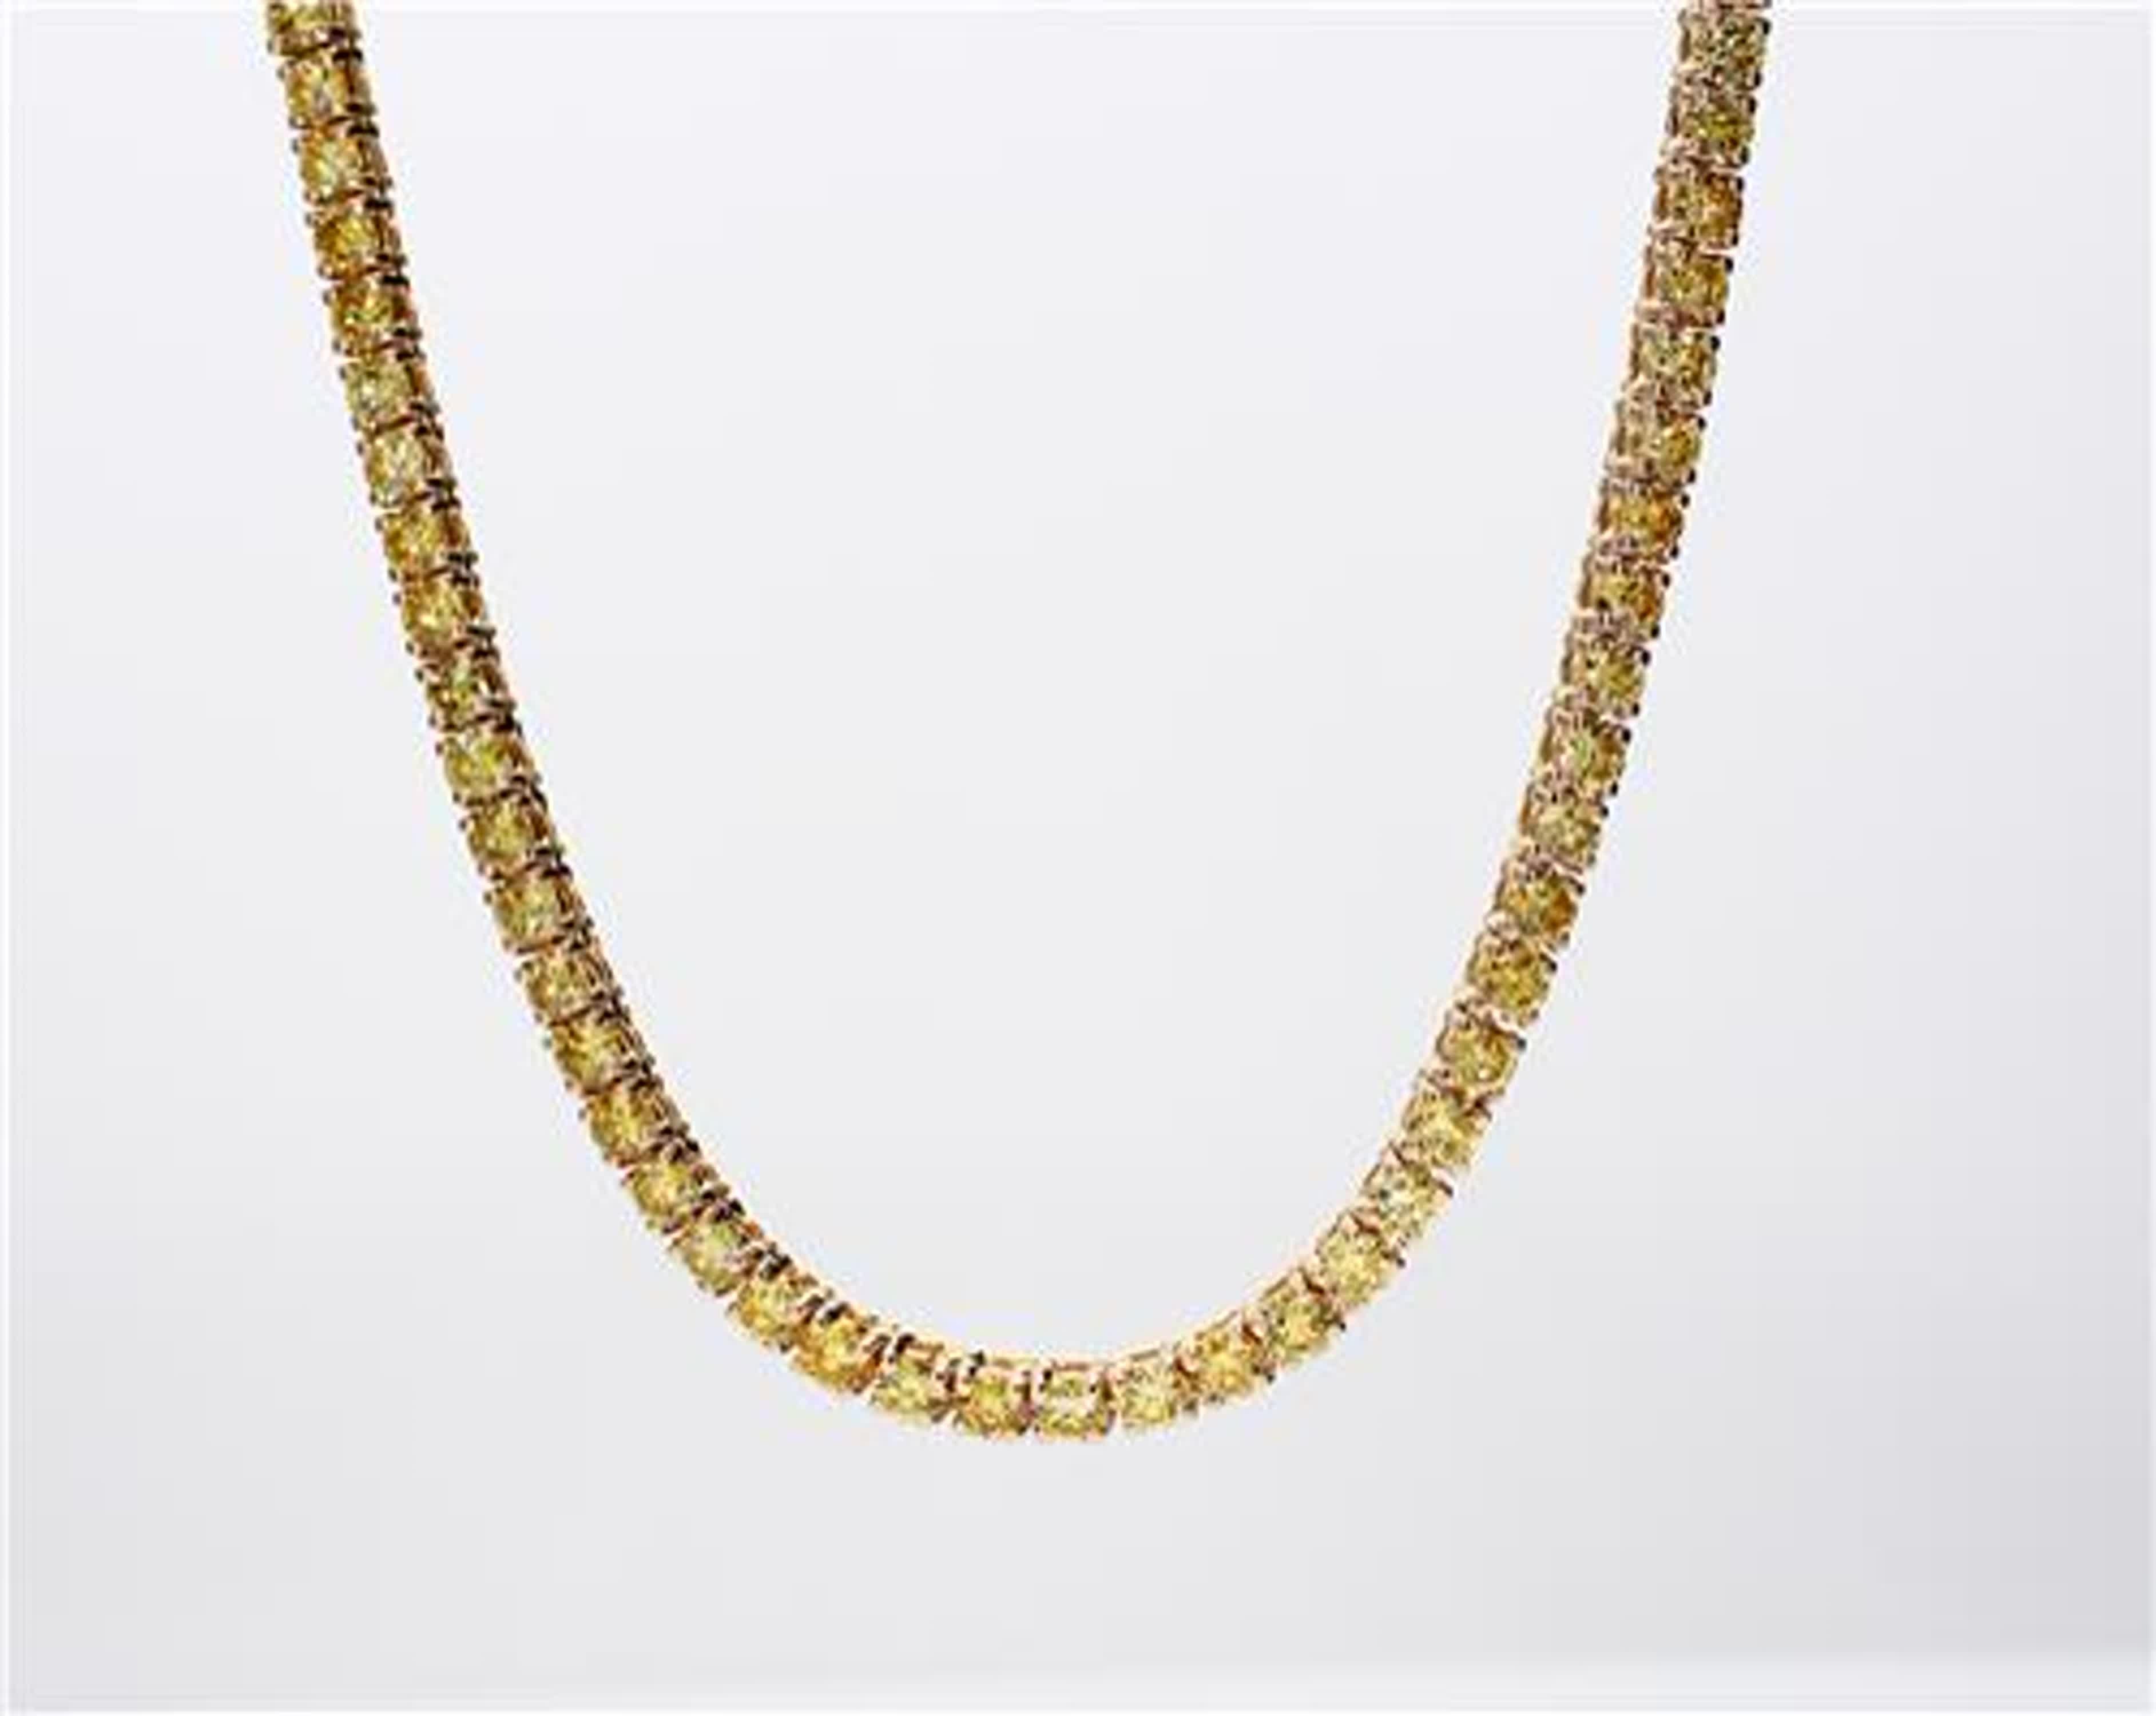 RareGemWorld's classic diamond necklace. Mounted in a beautiful 14K Yellow Gold setting with natural round yellow diamond's. This necklace is guaranteed to impress and enhance your personal collection.

Total Weight: 9.51cts

Yellow Diamond